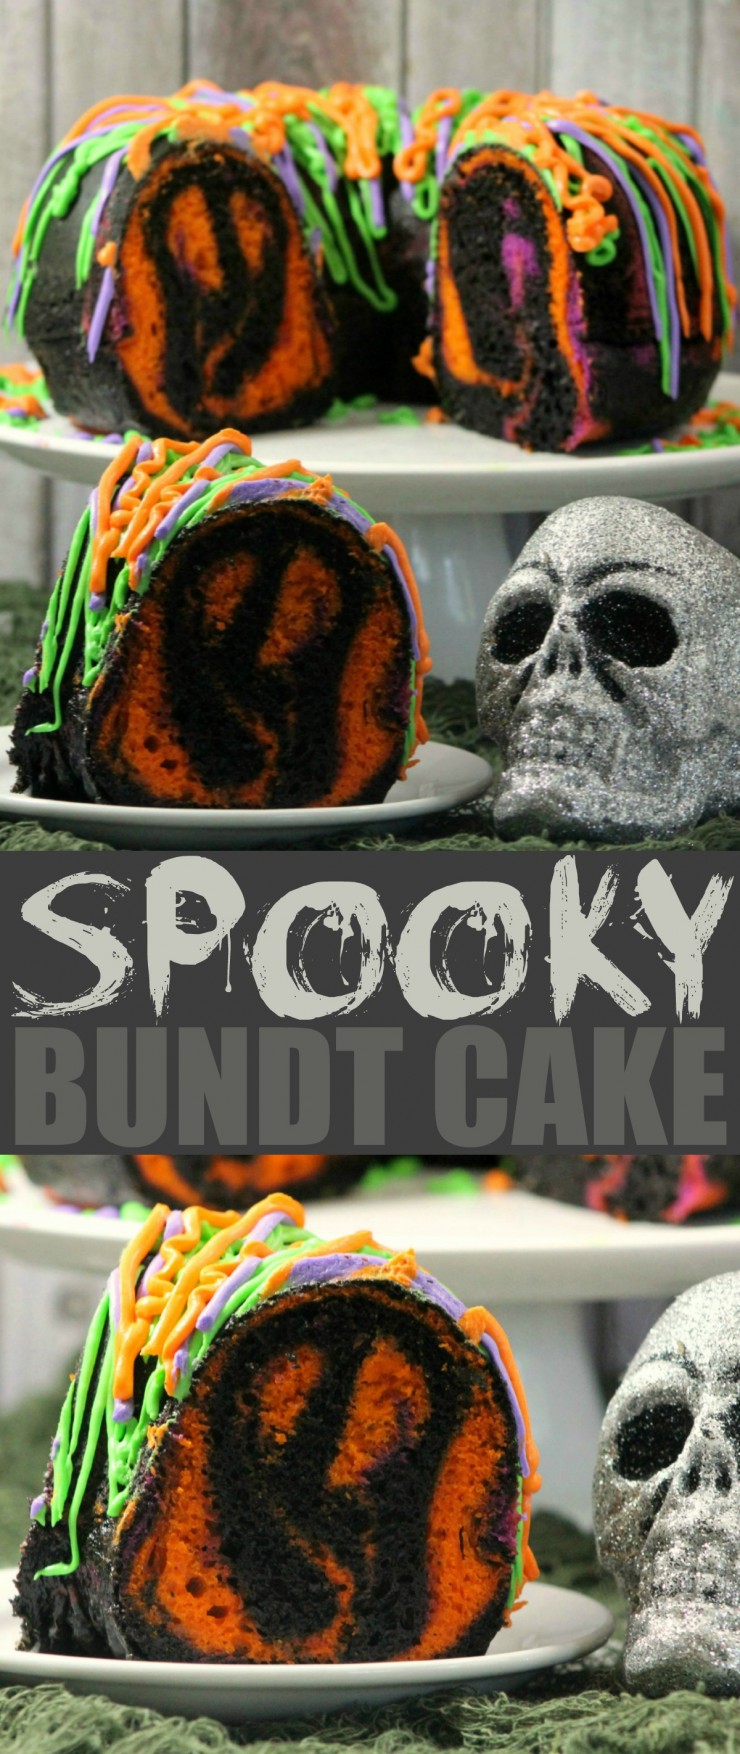 This spooky bundt cake is bound to be the hit of any Halloween party. If you love surprise inside cakes, this one is super easy to pull off - easy enough to get your little ghouls involved in making it.